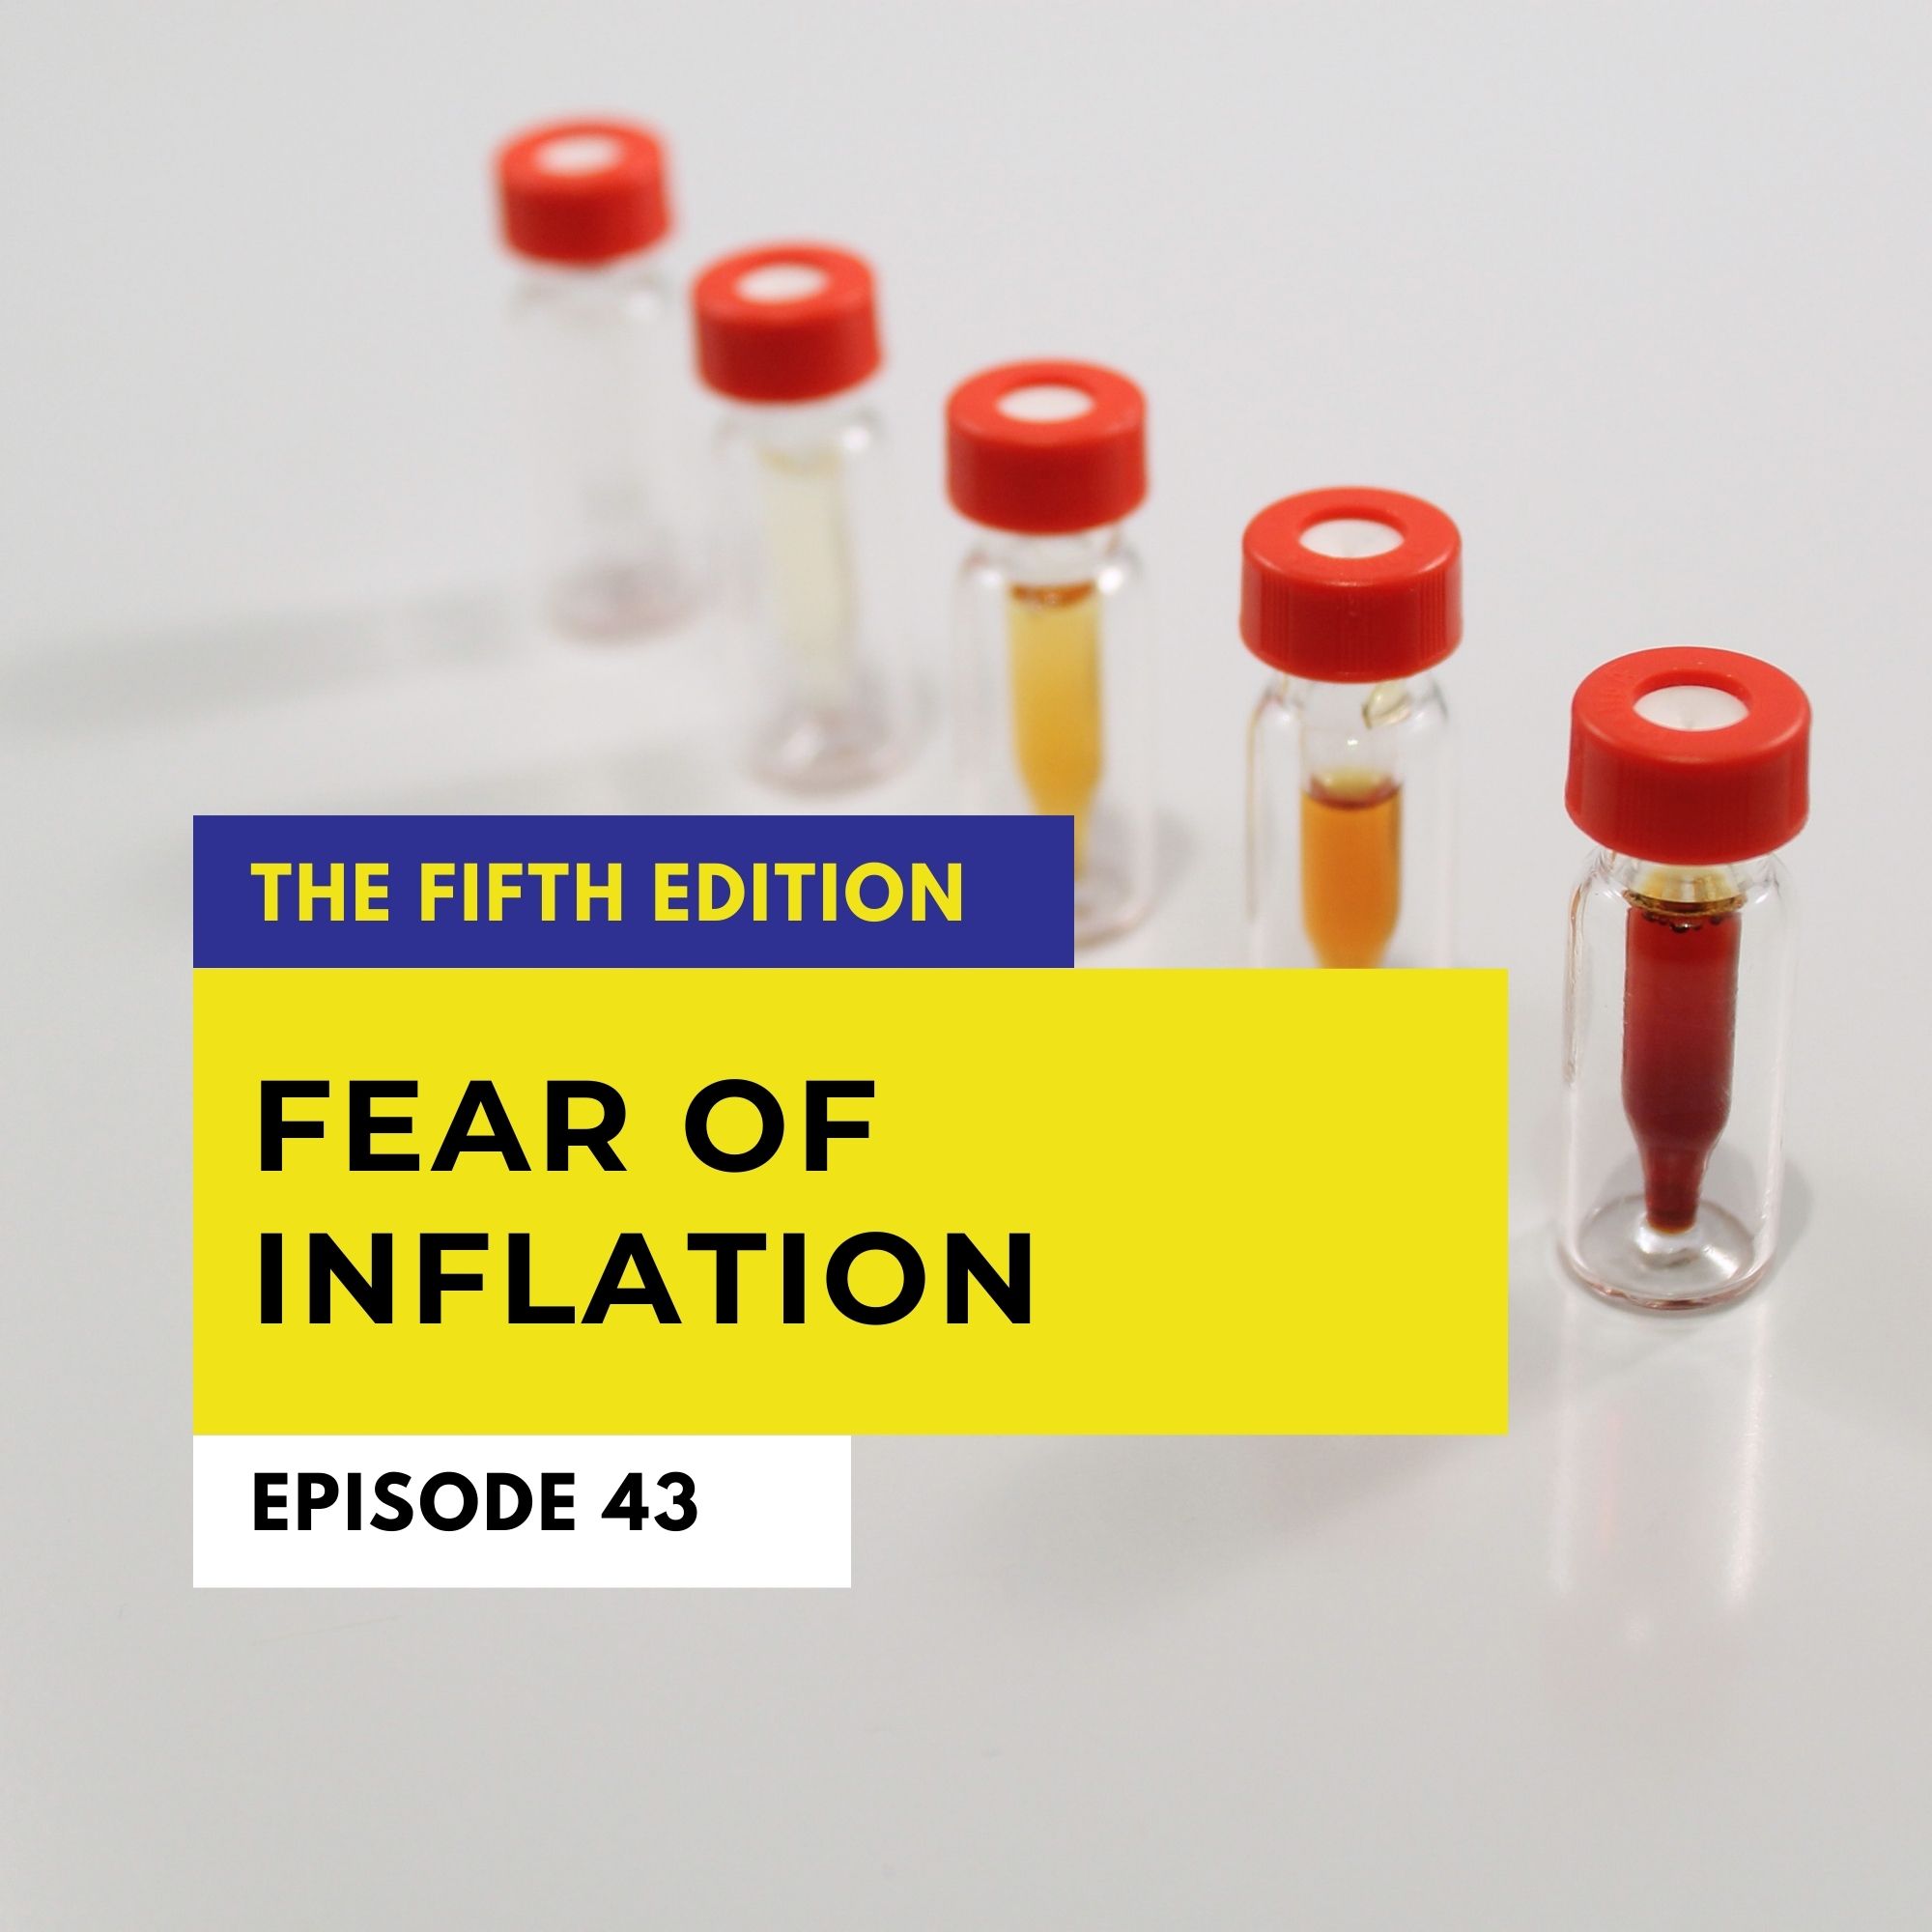 IBC And The Fear Of Inflation Image